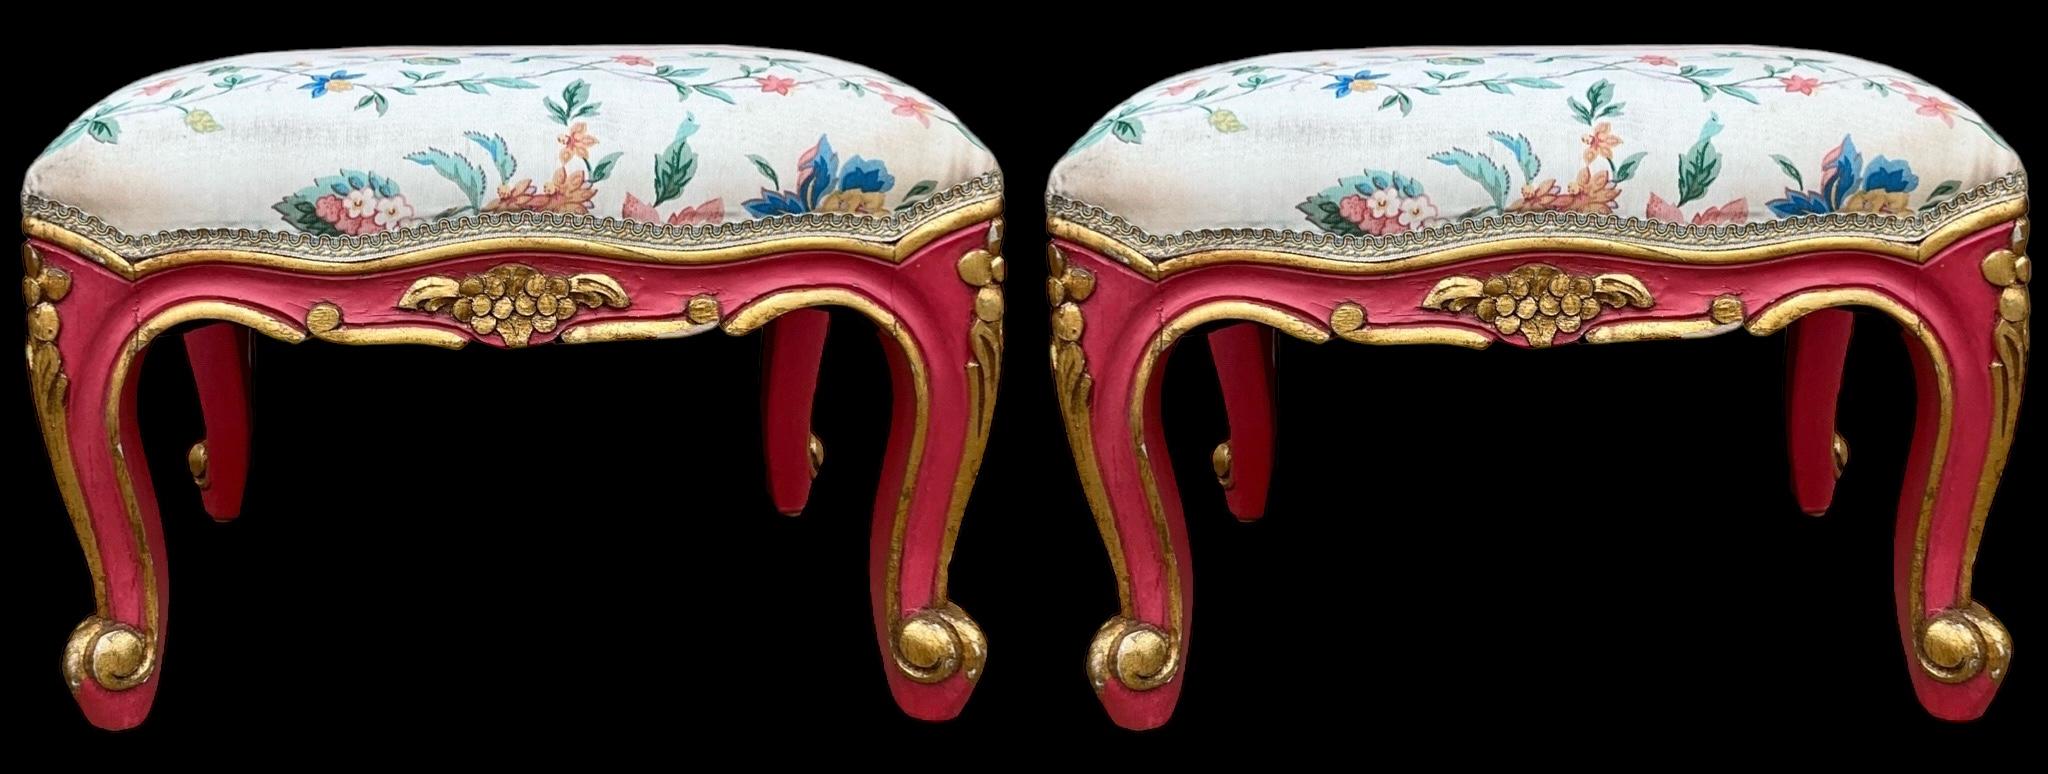 Mid-Century French Louis XVI Style Pink And Gilt Venetian Ottomans / Stools - 2 For Sale 1